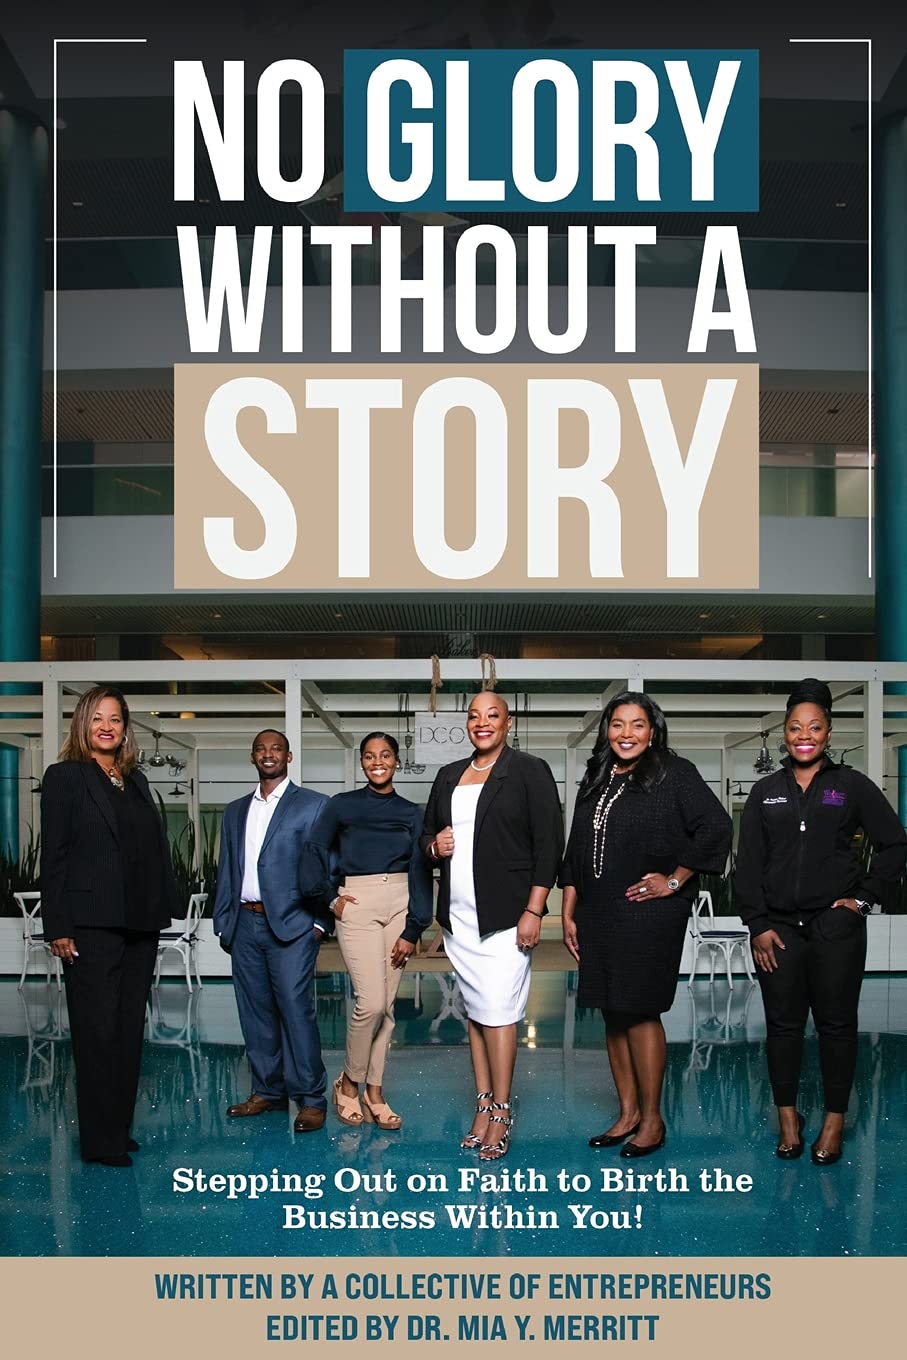 No Glory Without A Story! Co-Authored by Dr. Venessa Walker